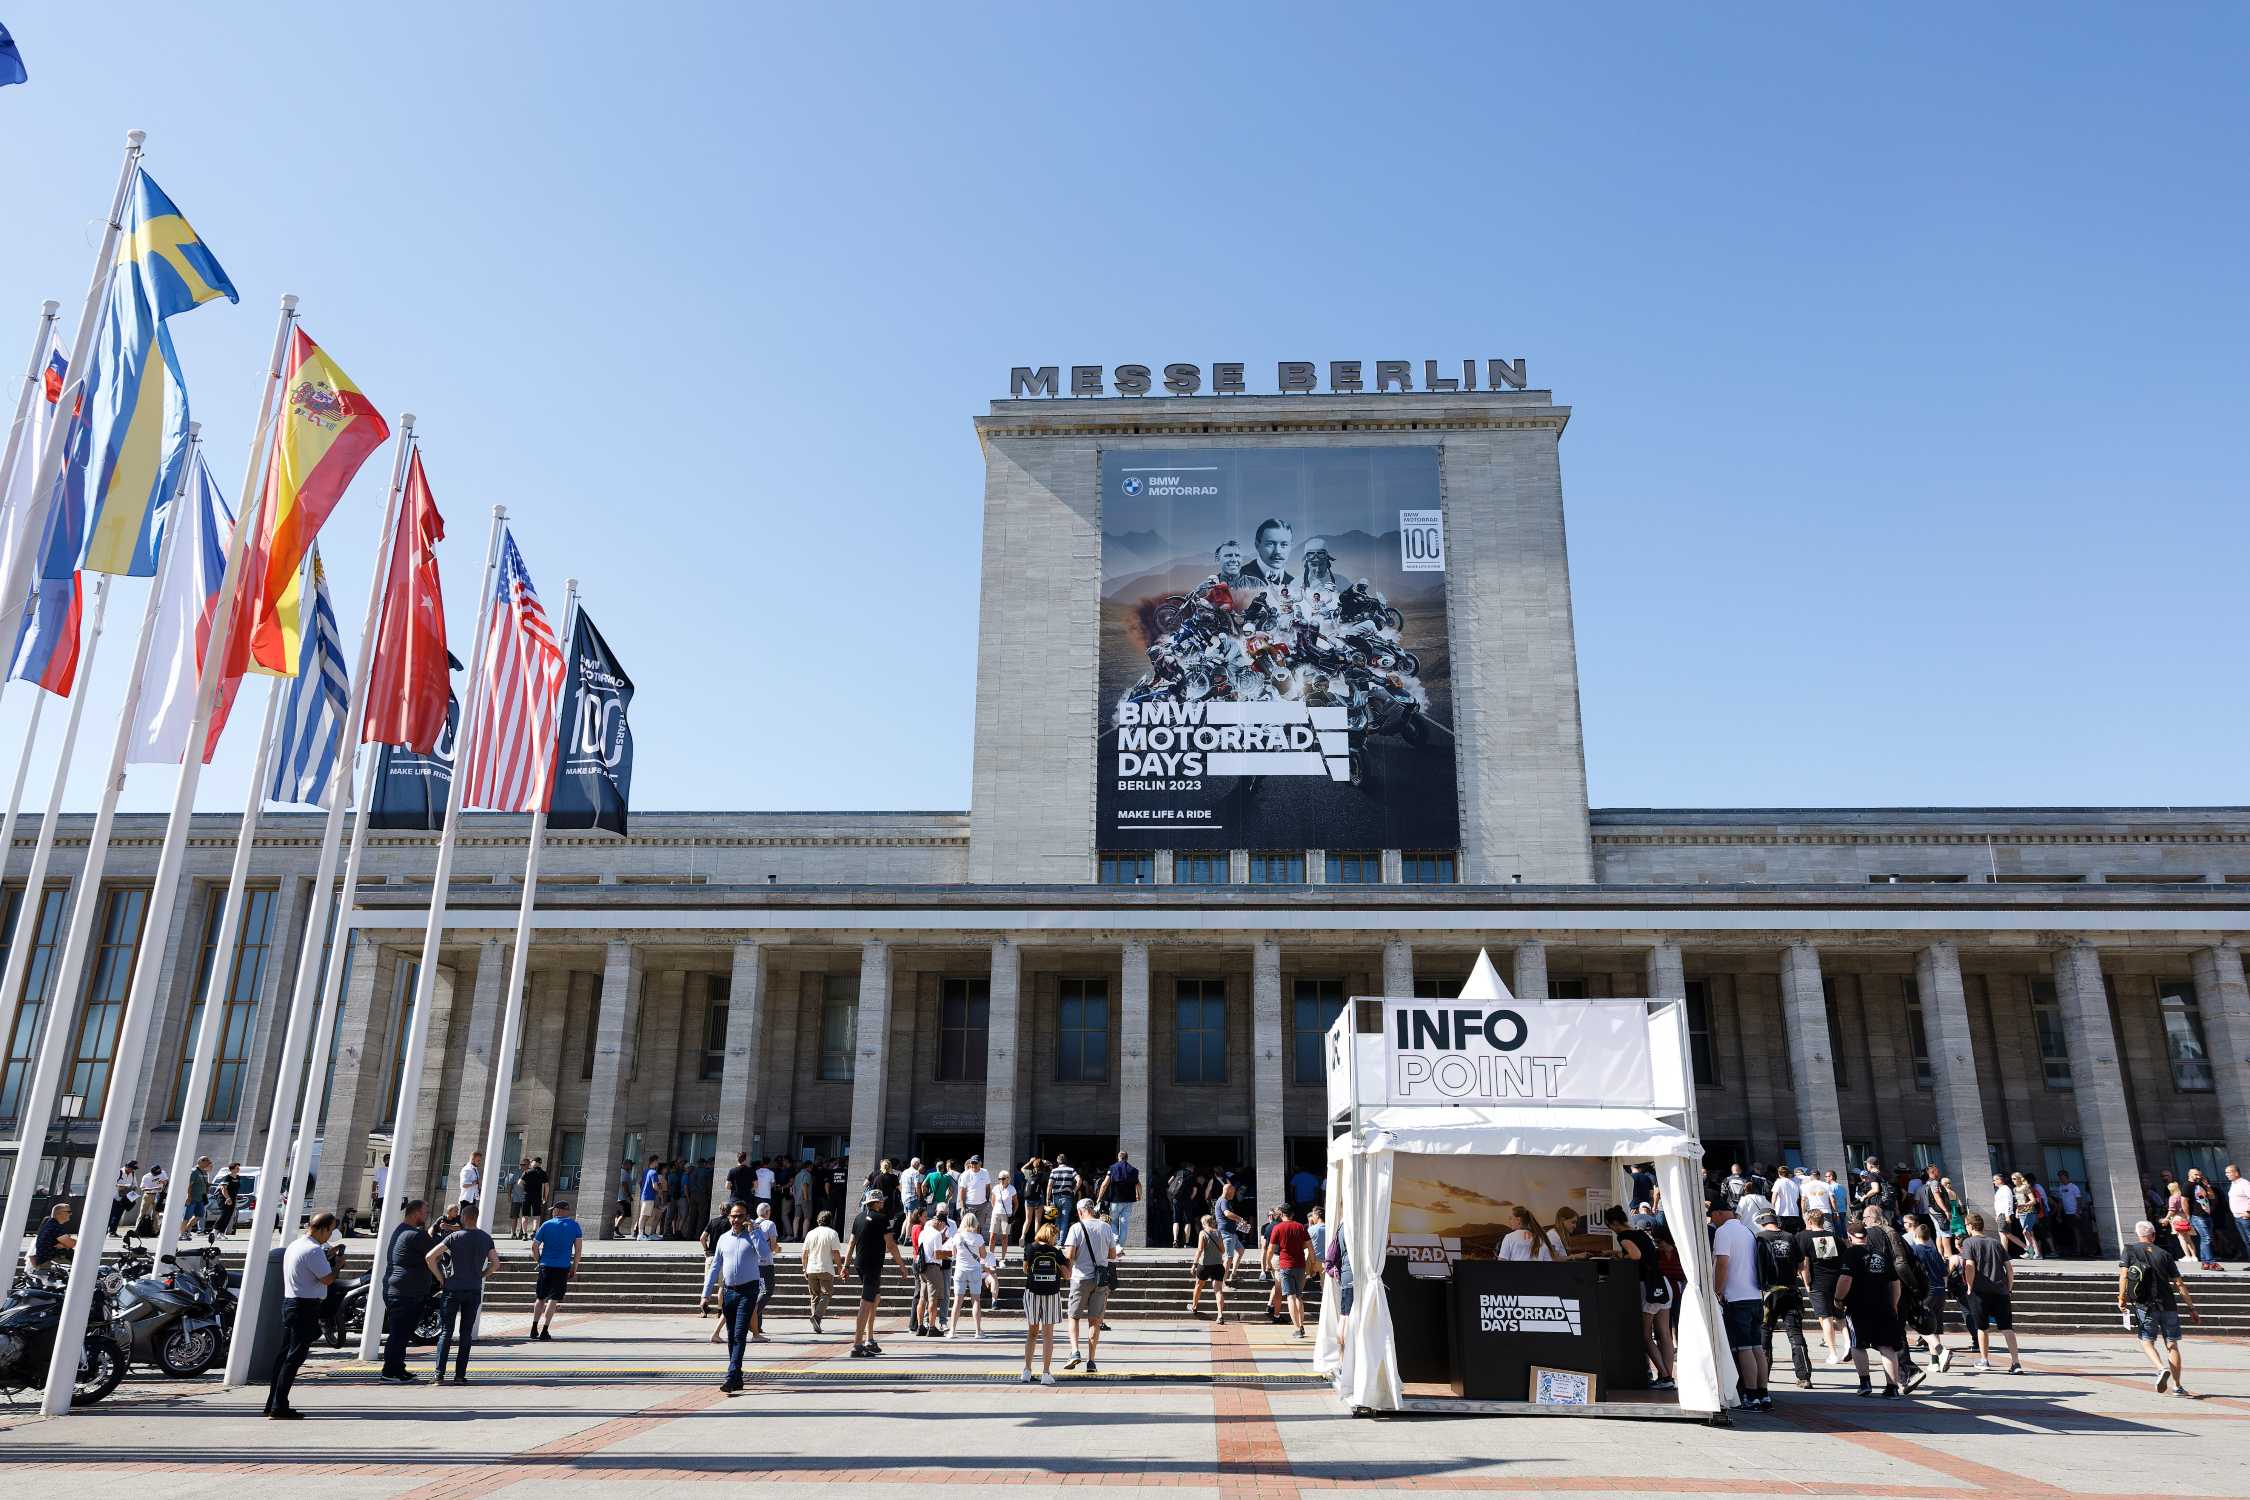 BMW Motorrad Draws a Crowd of 37,000 Enthusiasts for Berlin Celebration